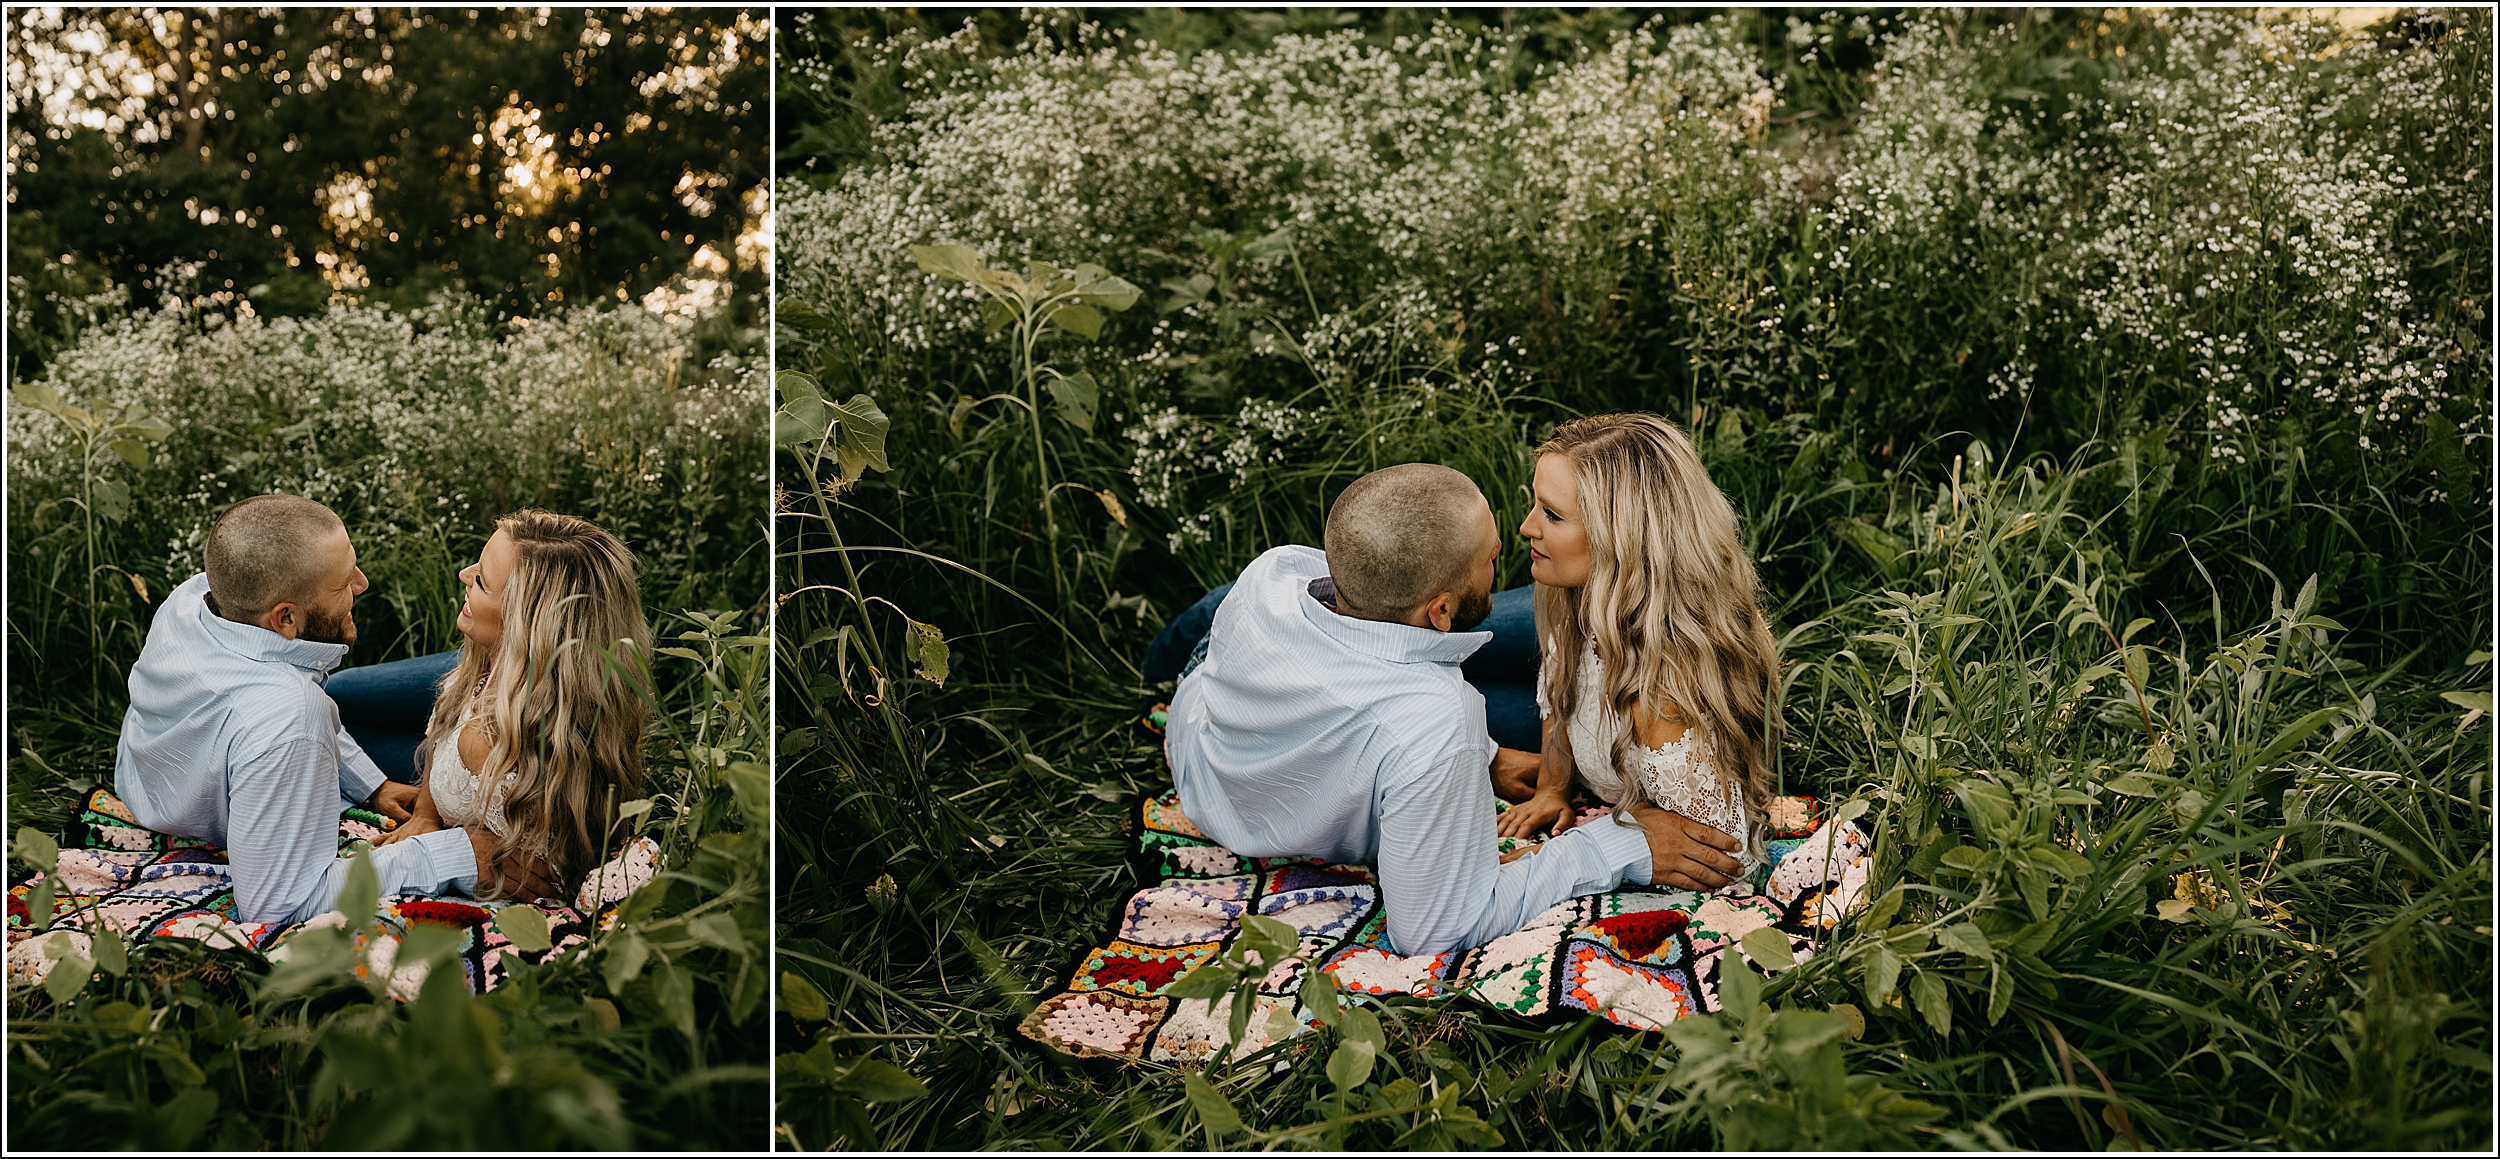 Minnesota outdoor Photographer couple engagement laying on blanket in wildflowers sunset trees